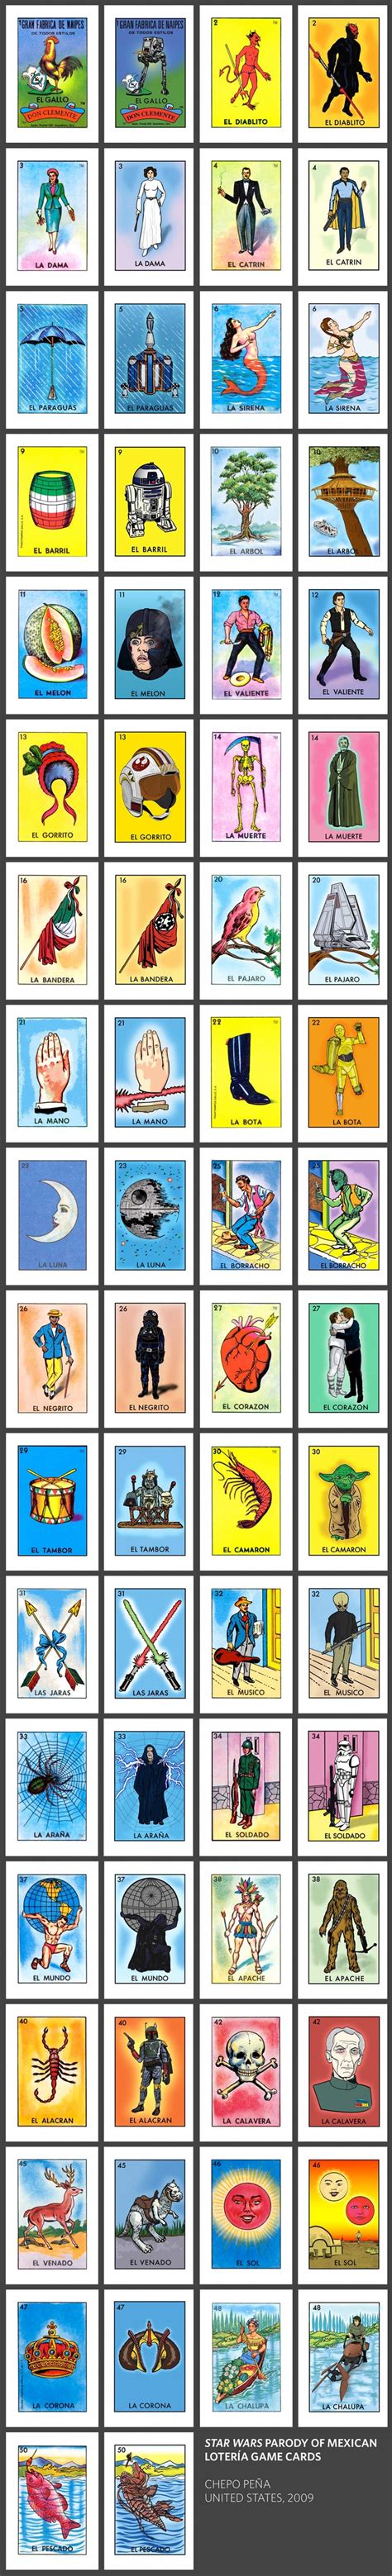 See more ideas about loteria cards, loteria, mexican art. Loteria Printable Cards Free | Free Printable A to Z